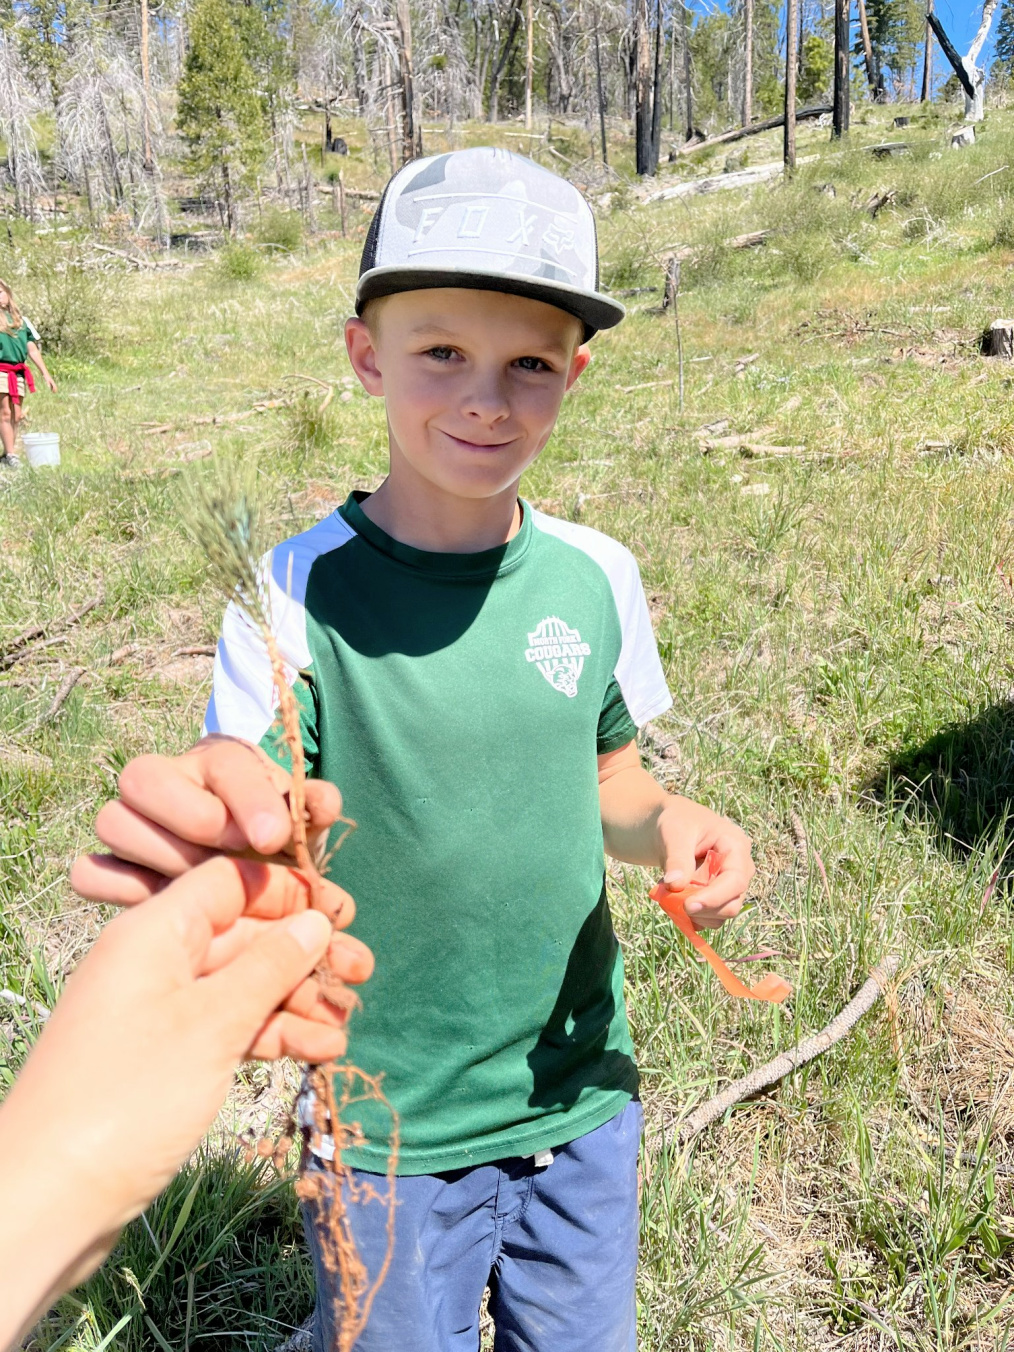 Smiling student volunteer taking a tree seedling from another person's hand